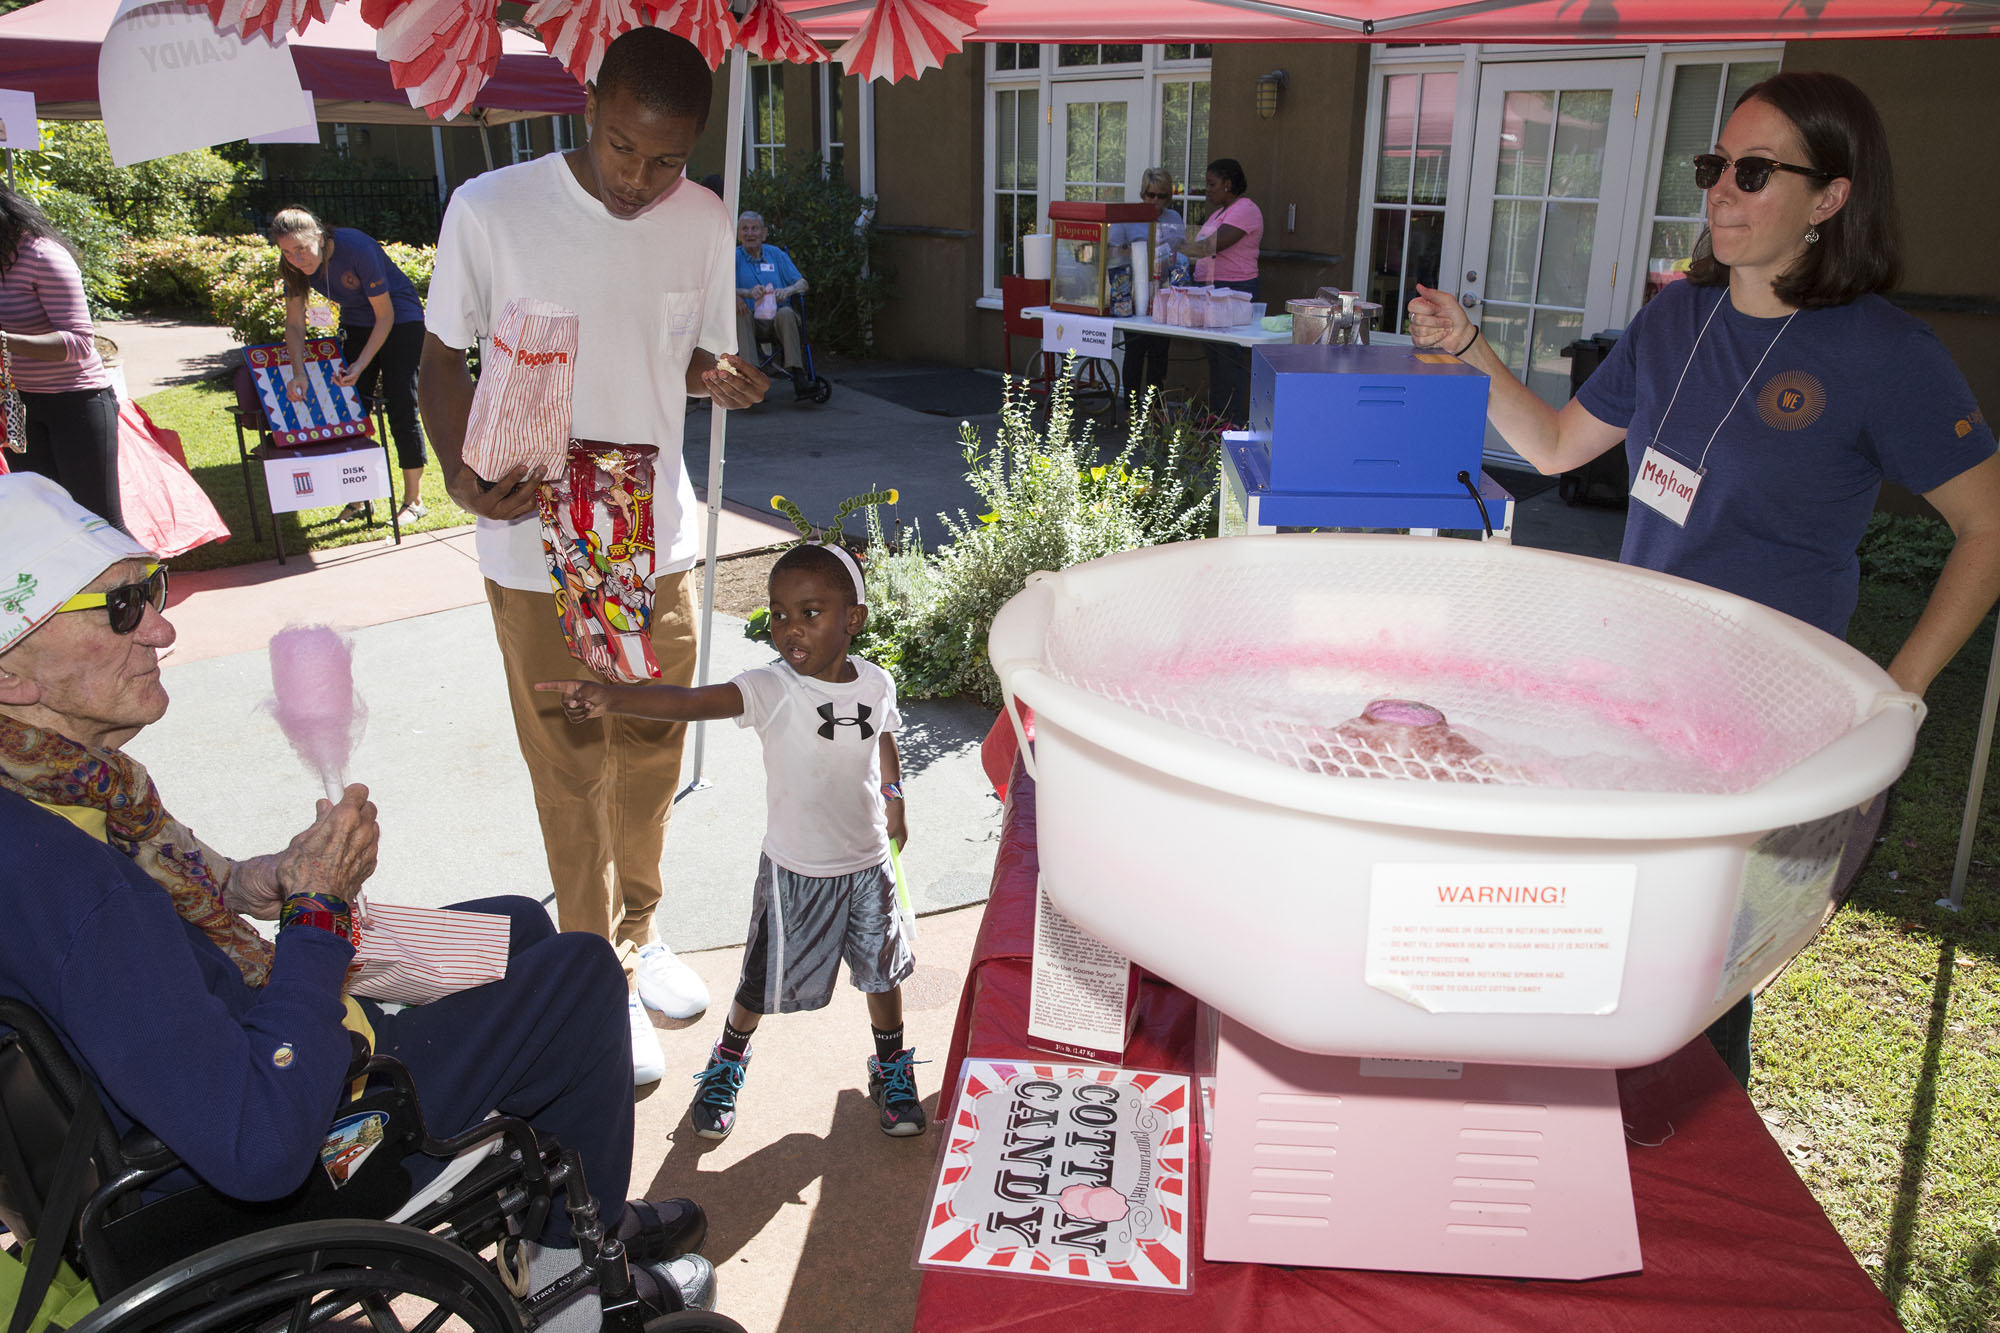 What’s a carnival without cotton candy? Workers from the Office for Diversity and Equity and the psychology department ran a carnival for preschoolers and senior citizens at JABA.